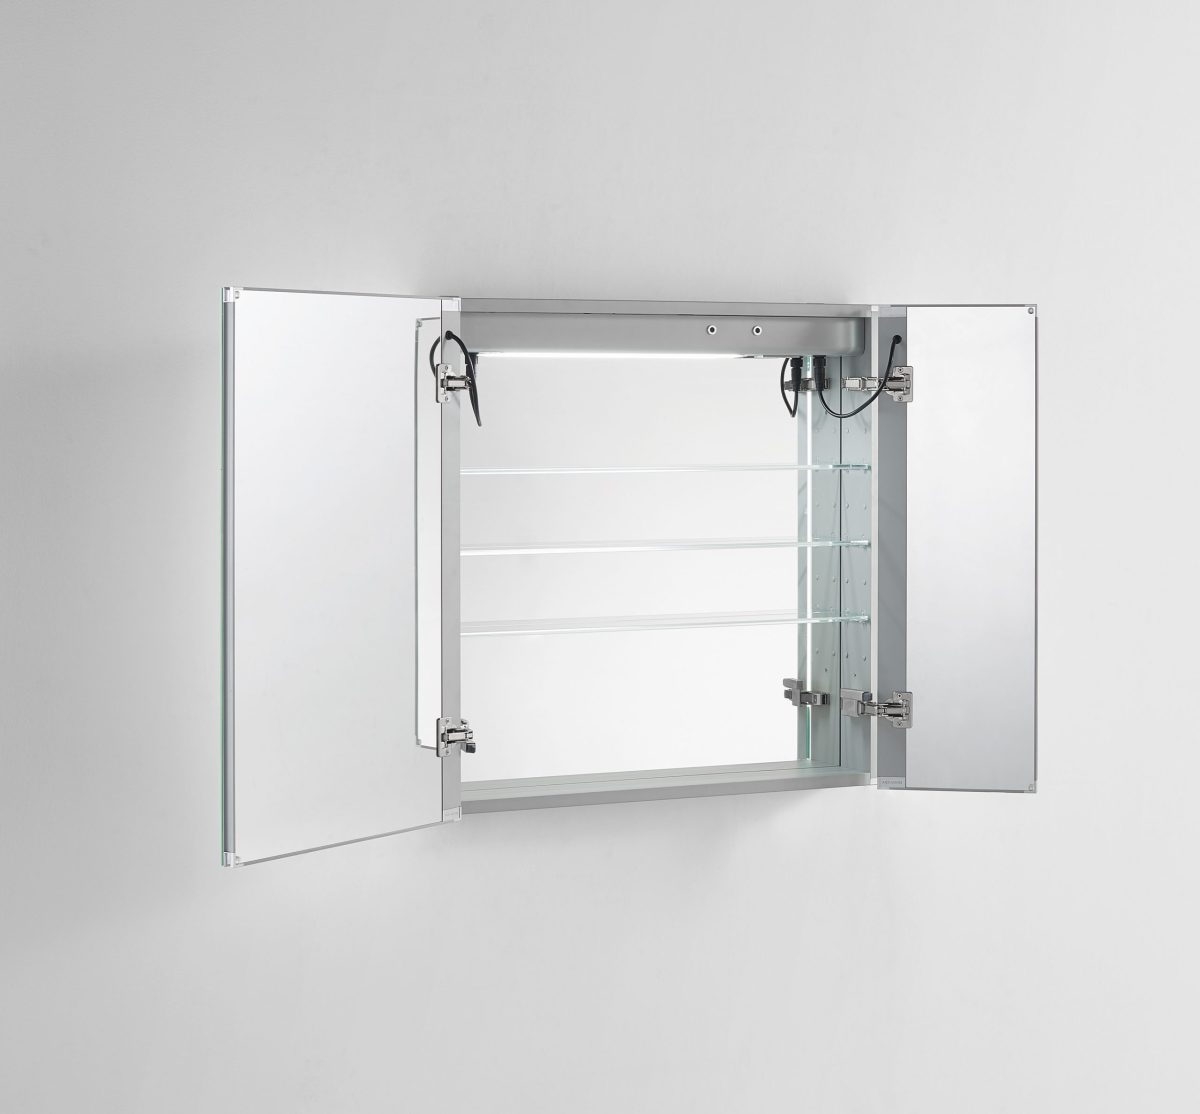 AQUADOM Signature Royale 30 inches x 30 inches LED Lighted Mirror Glass Medicine Cabinet for Bathroom